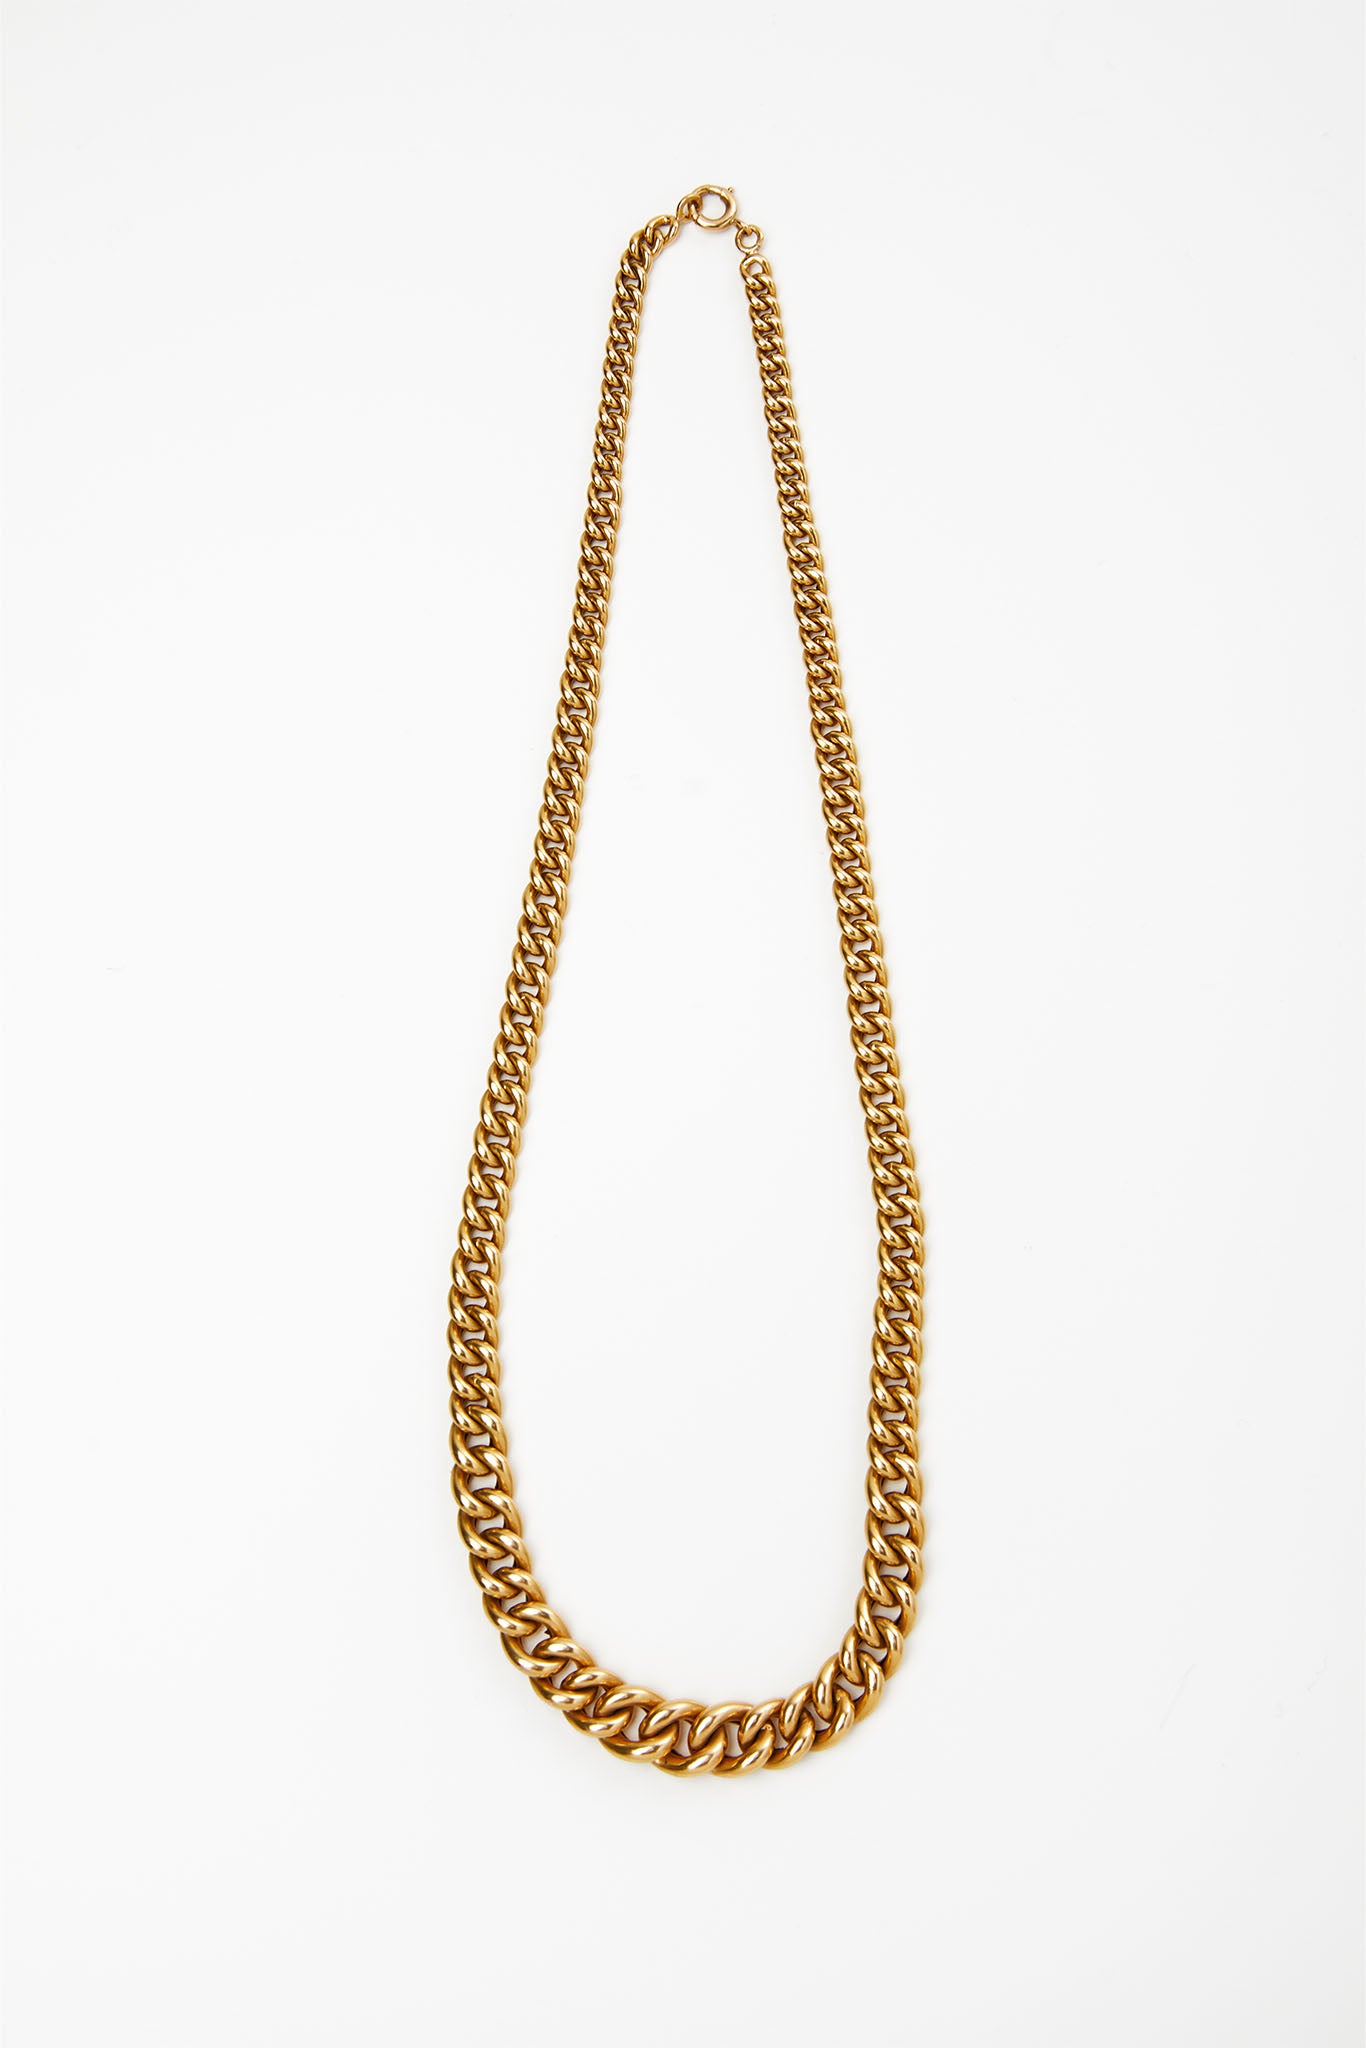 Antique Gold Faceted Curb Link Chain